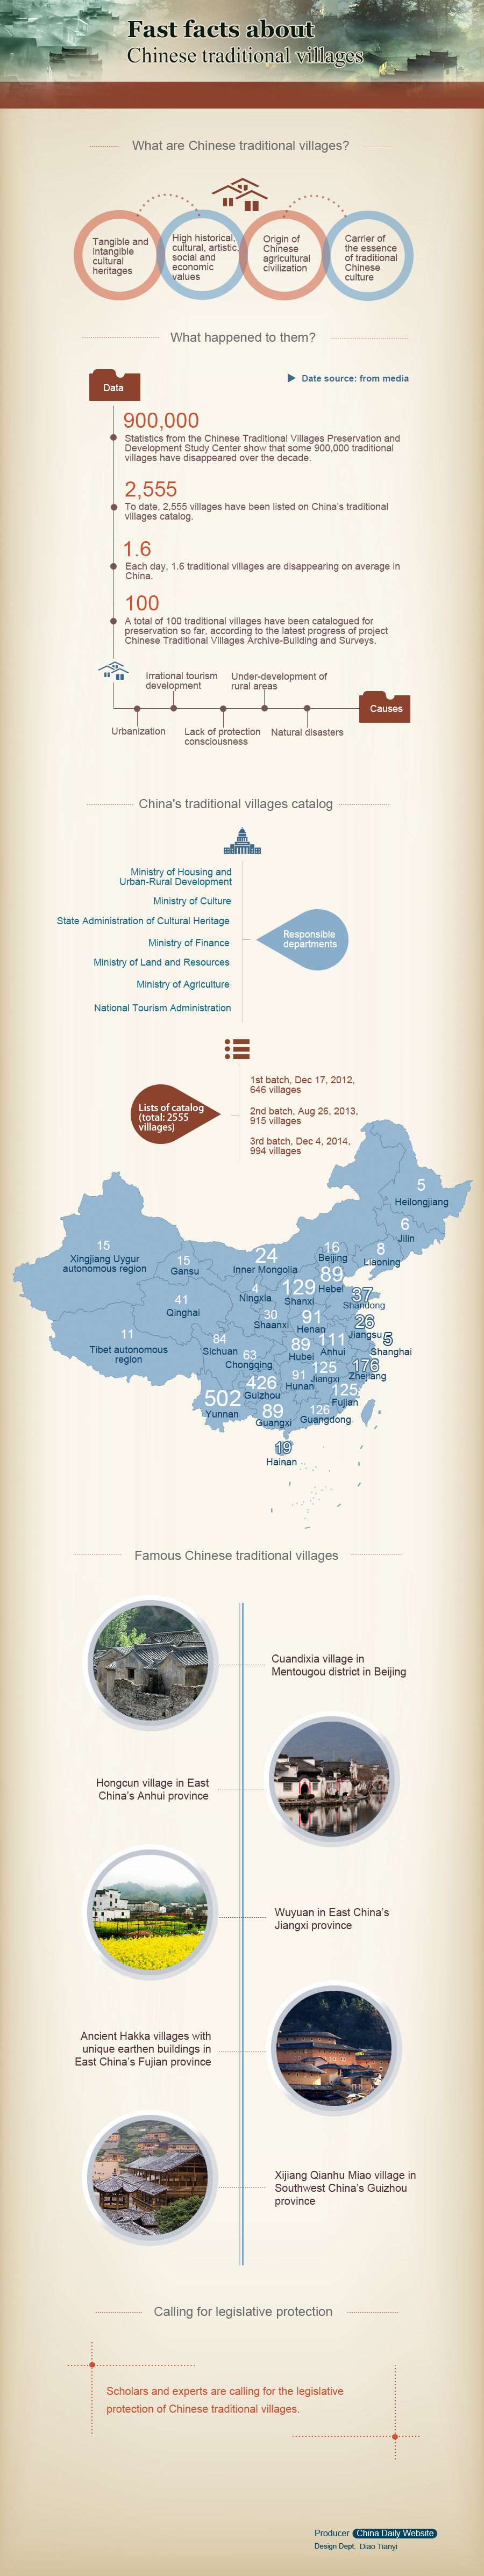 Fast facts about Chinese traditional villages